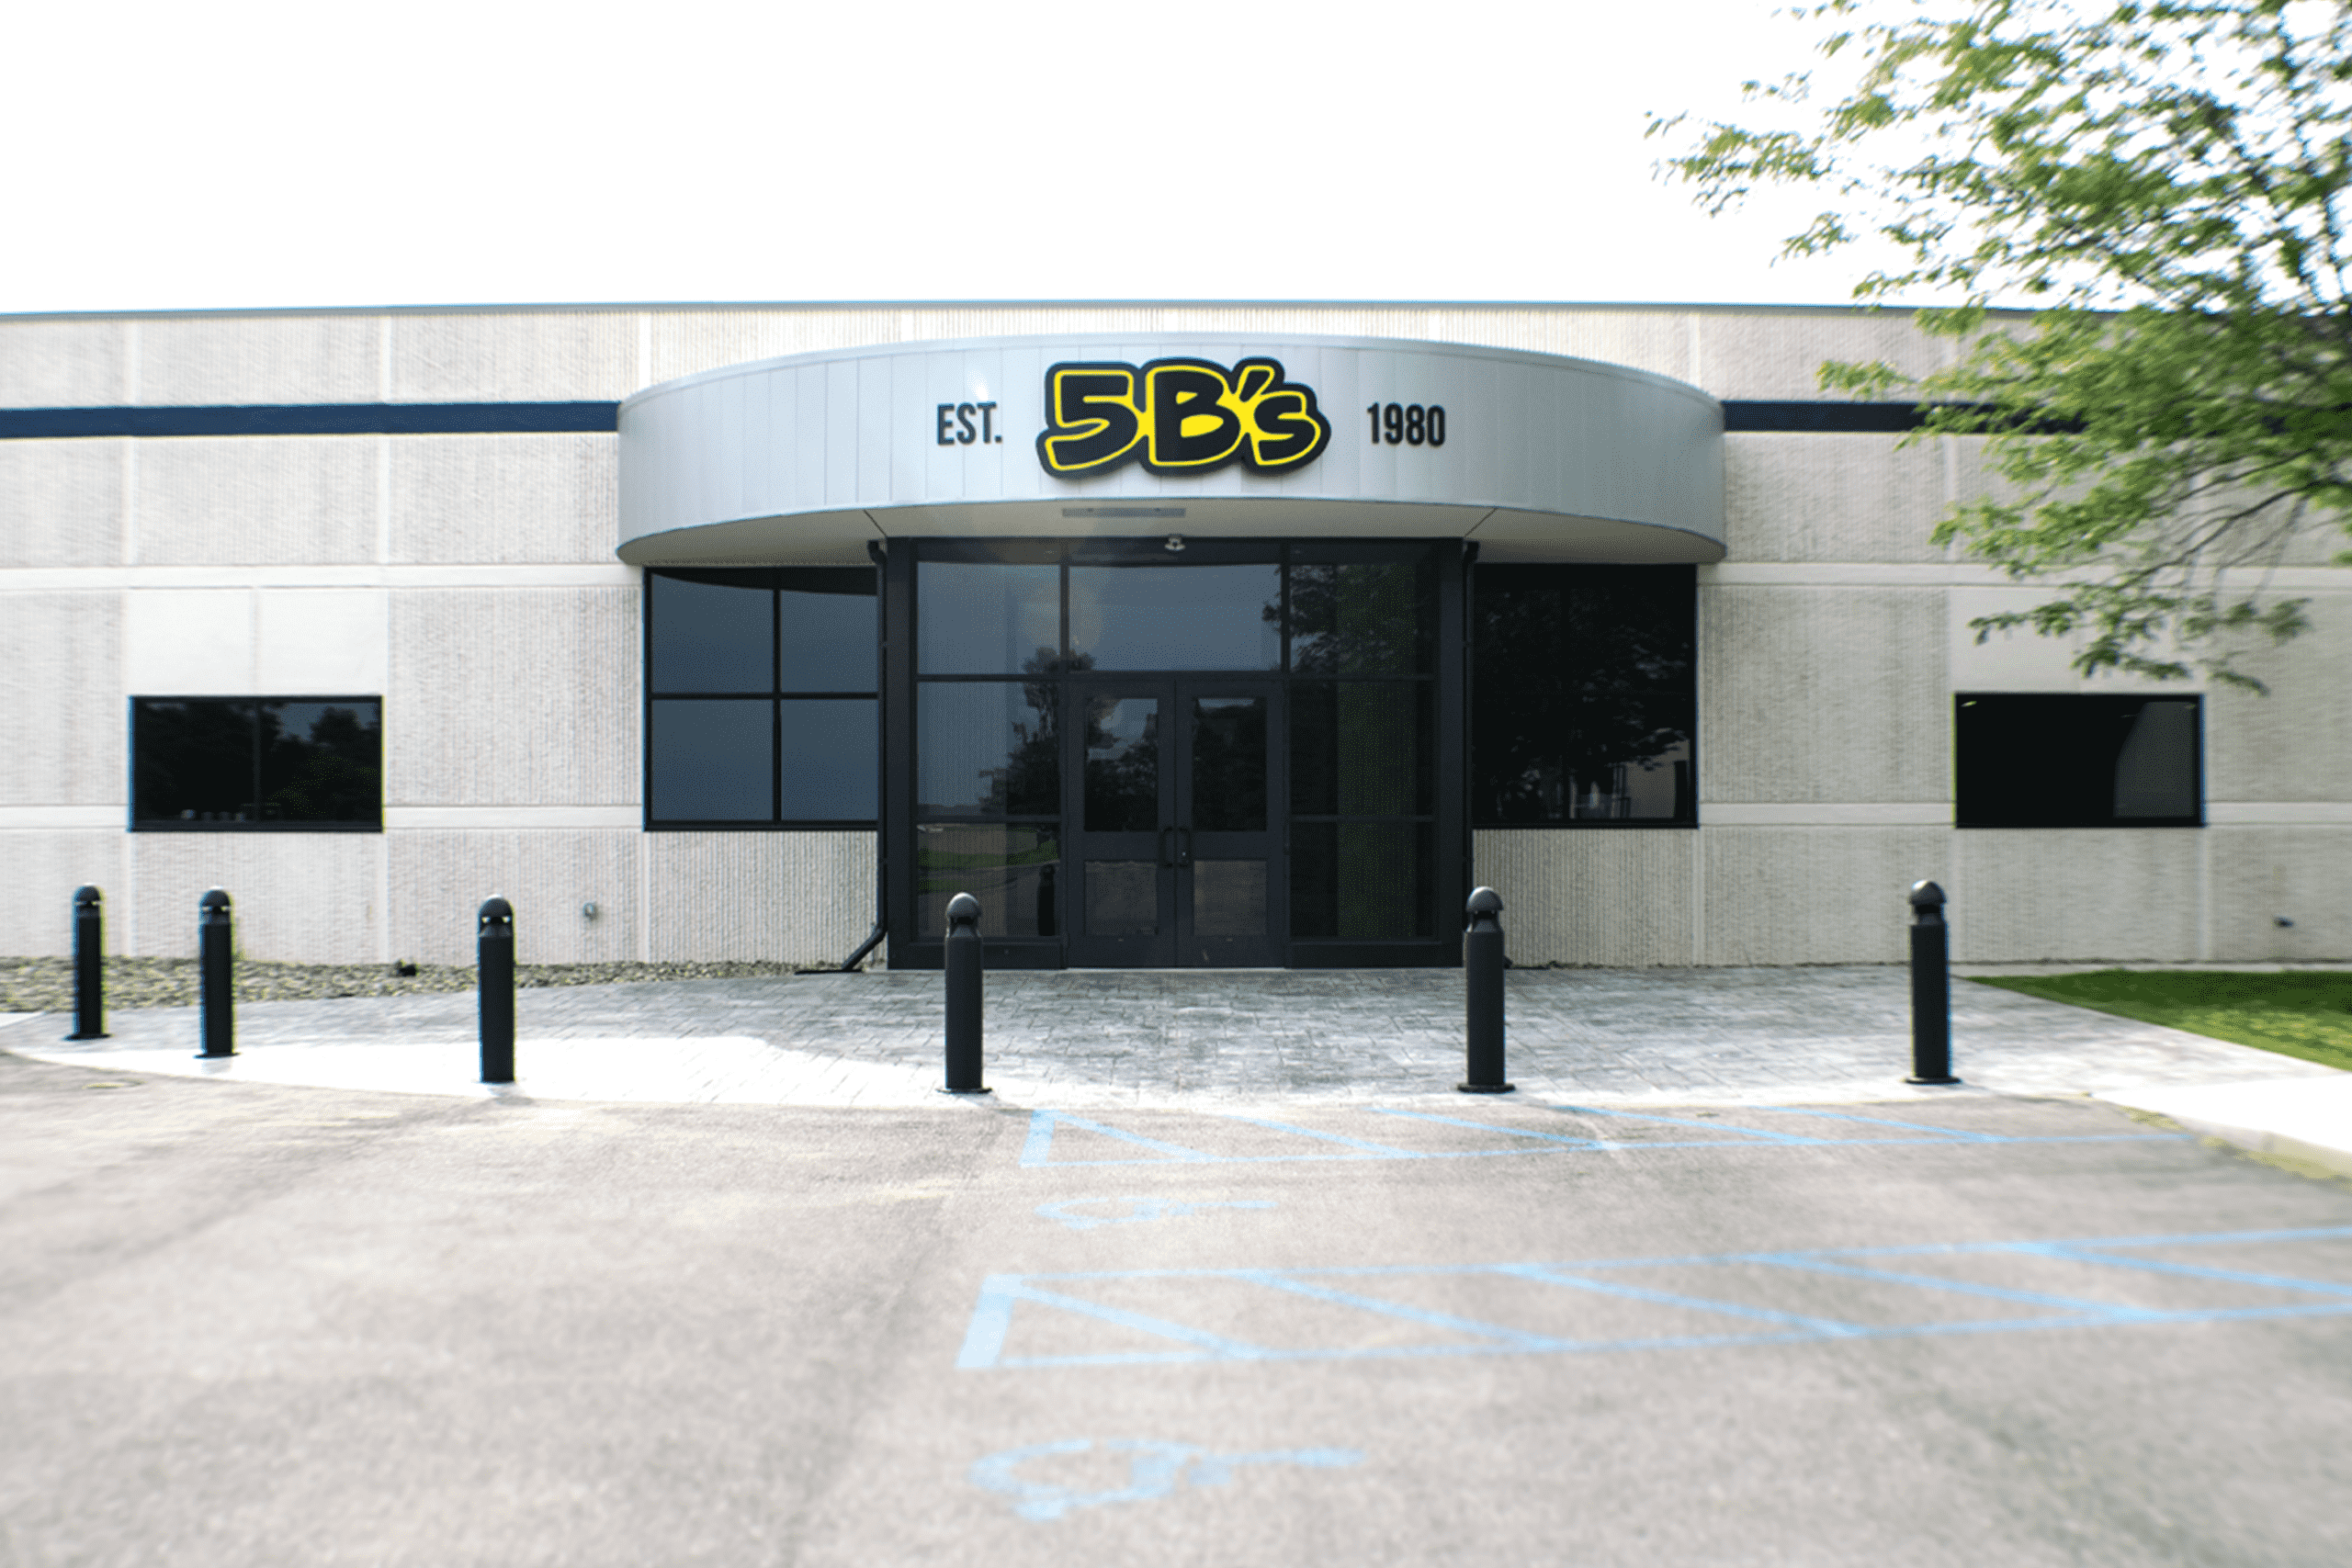 Exterior of 5B's. If you are unable to view this image please make sure your browser and Operating system are up to date. As well as your browser and Operating system’s compatibility with .WebP files.